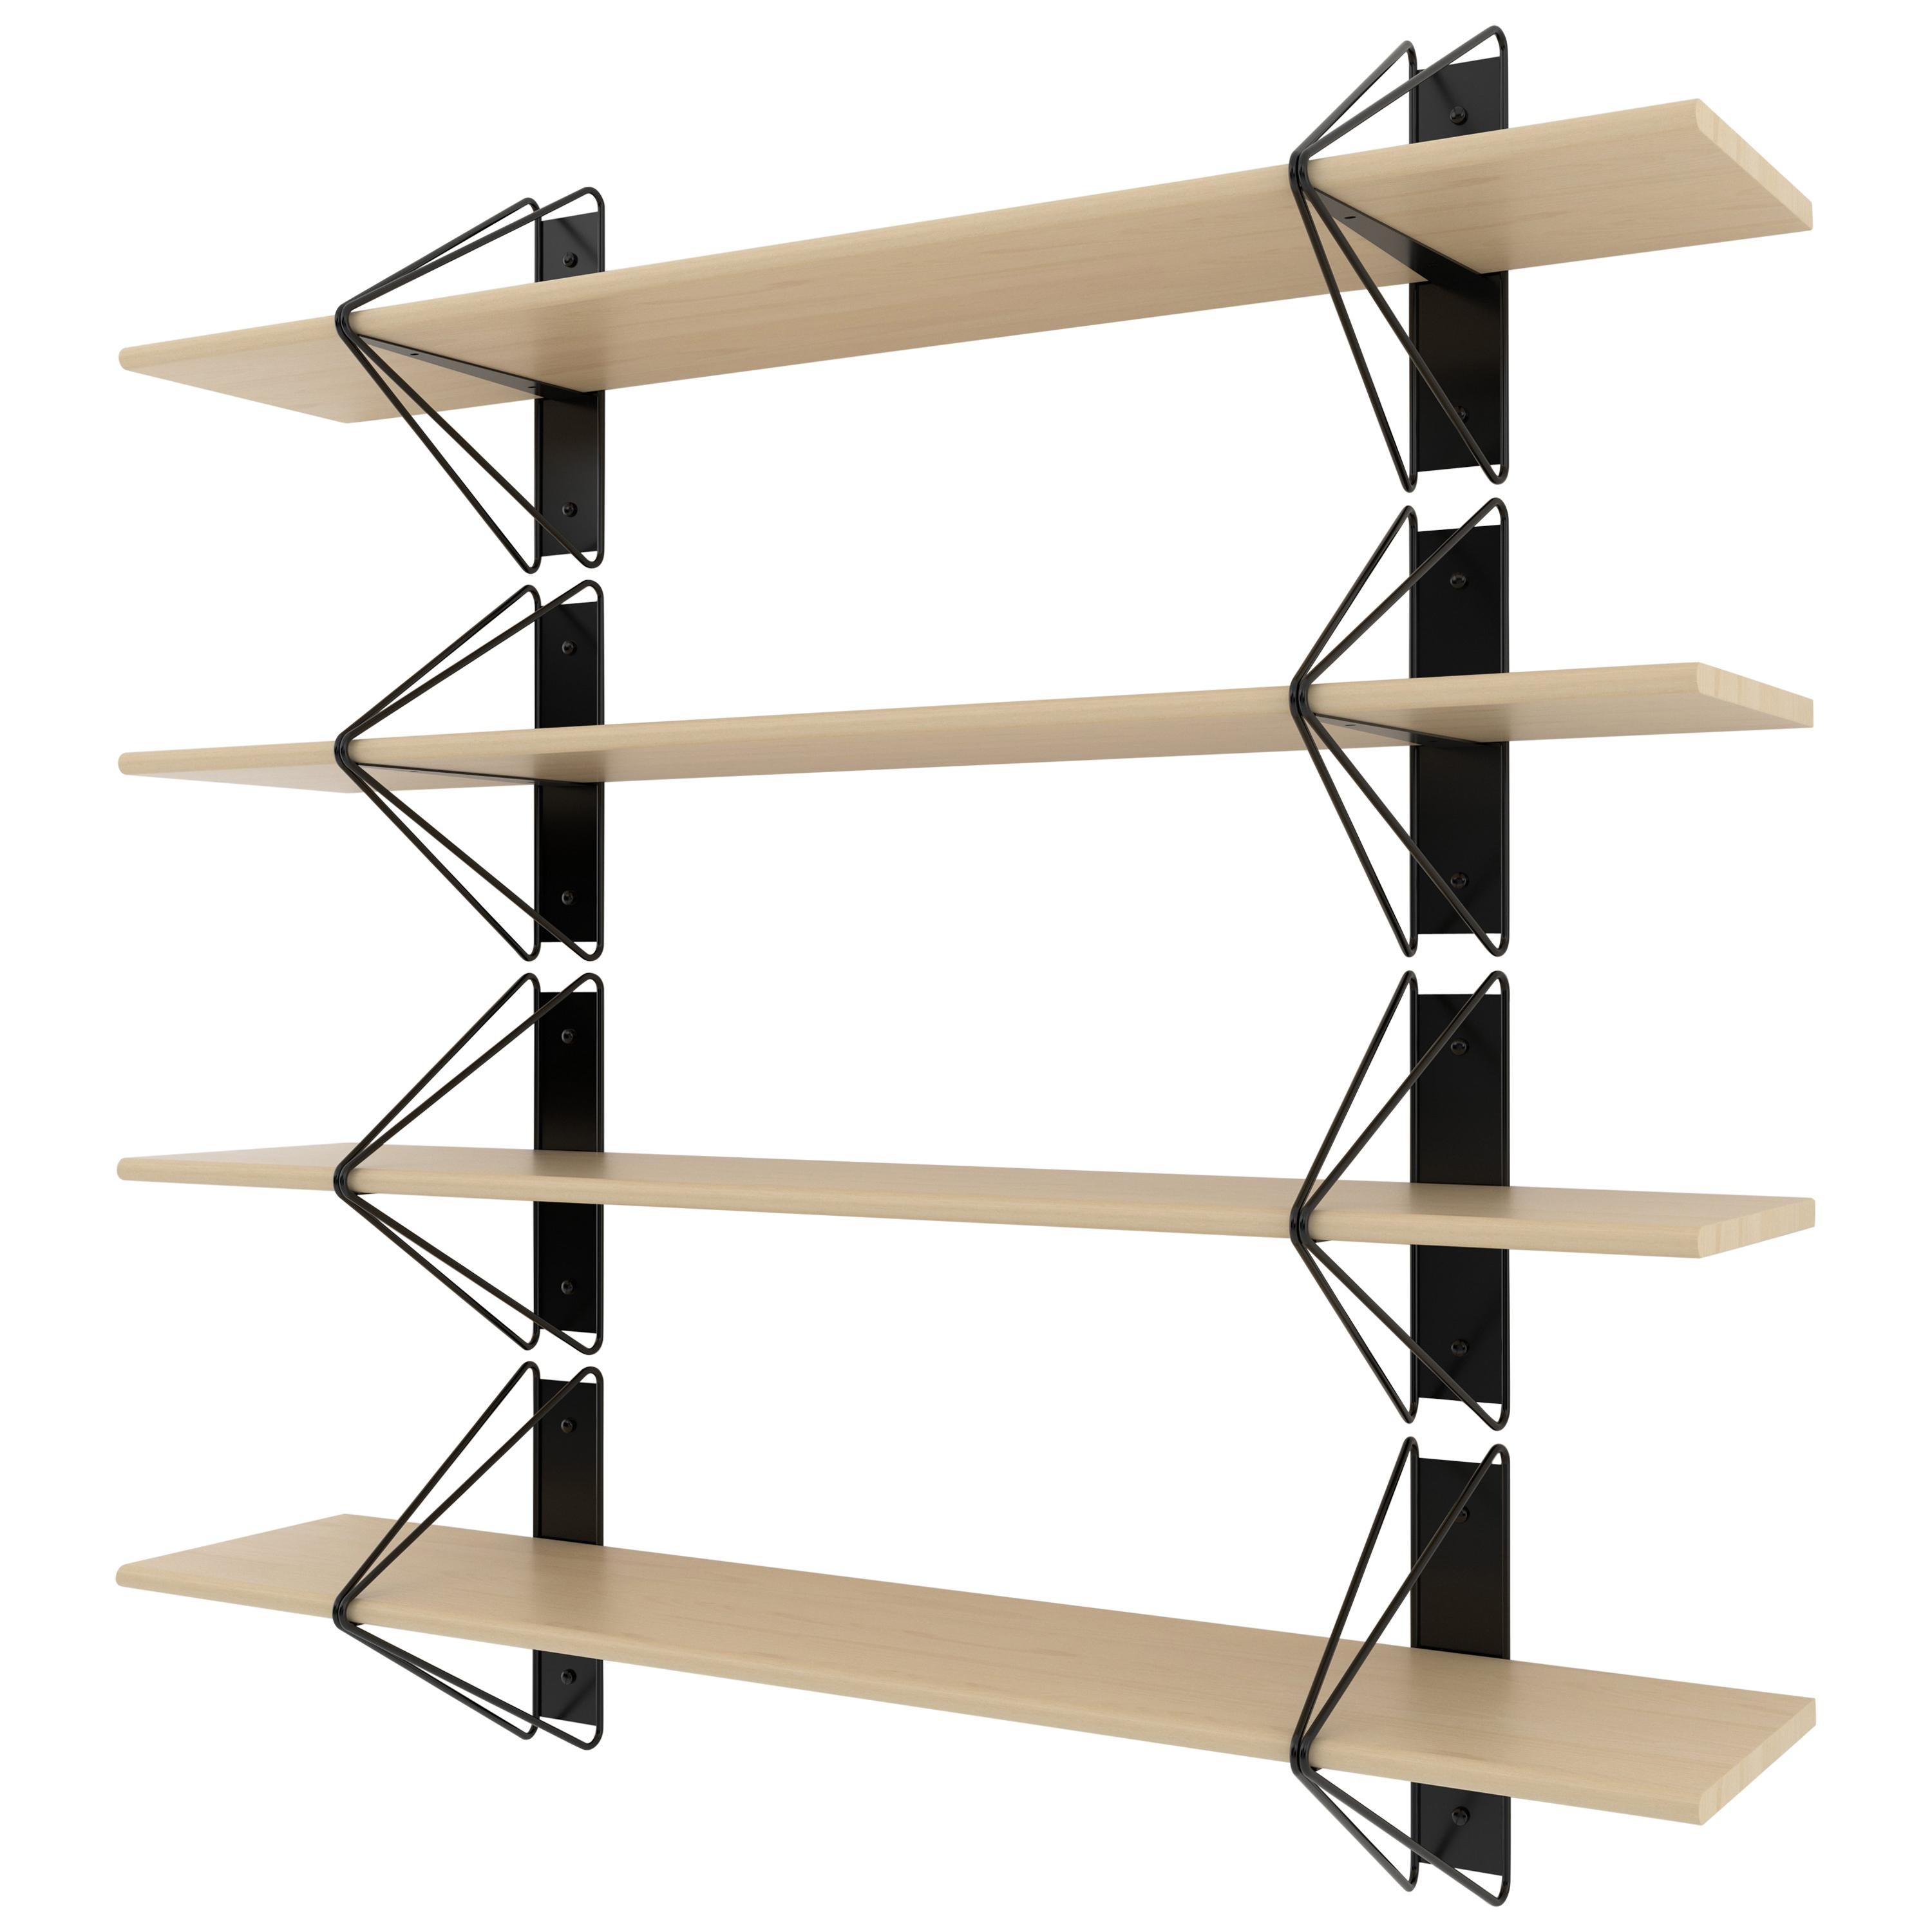 American Set of 4 Strut Shelves from Souda, White, Made to Order For Sale